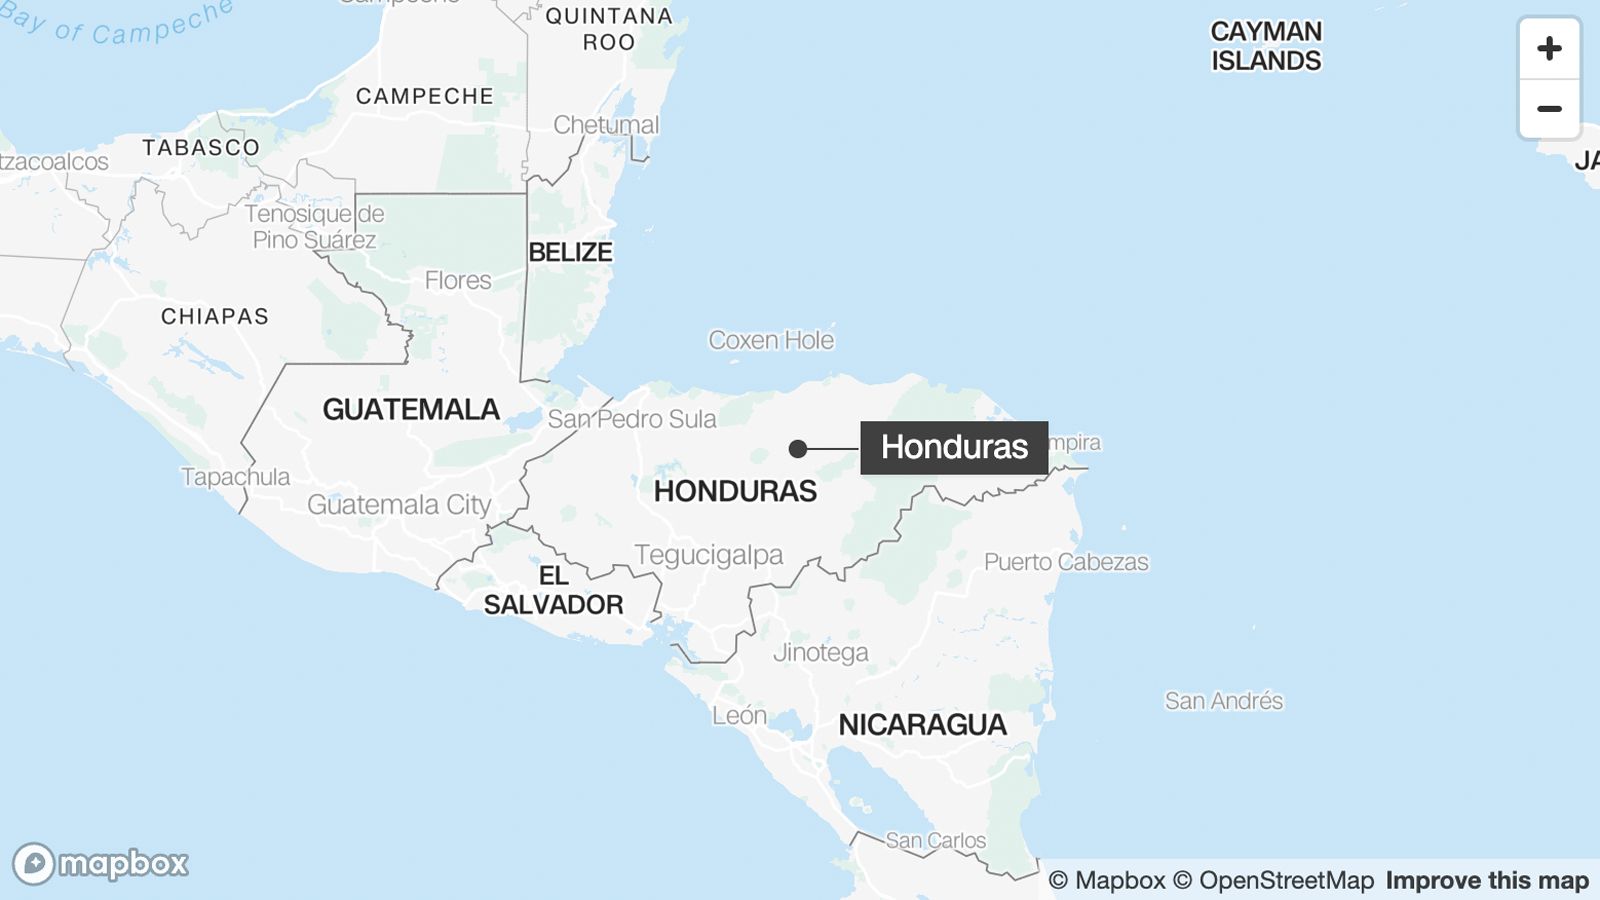 Ship with 20 tourists onboard sinks in Honduras, rescue operation underway